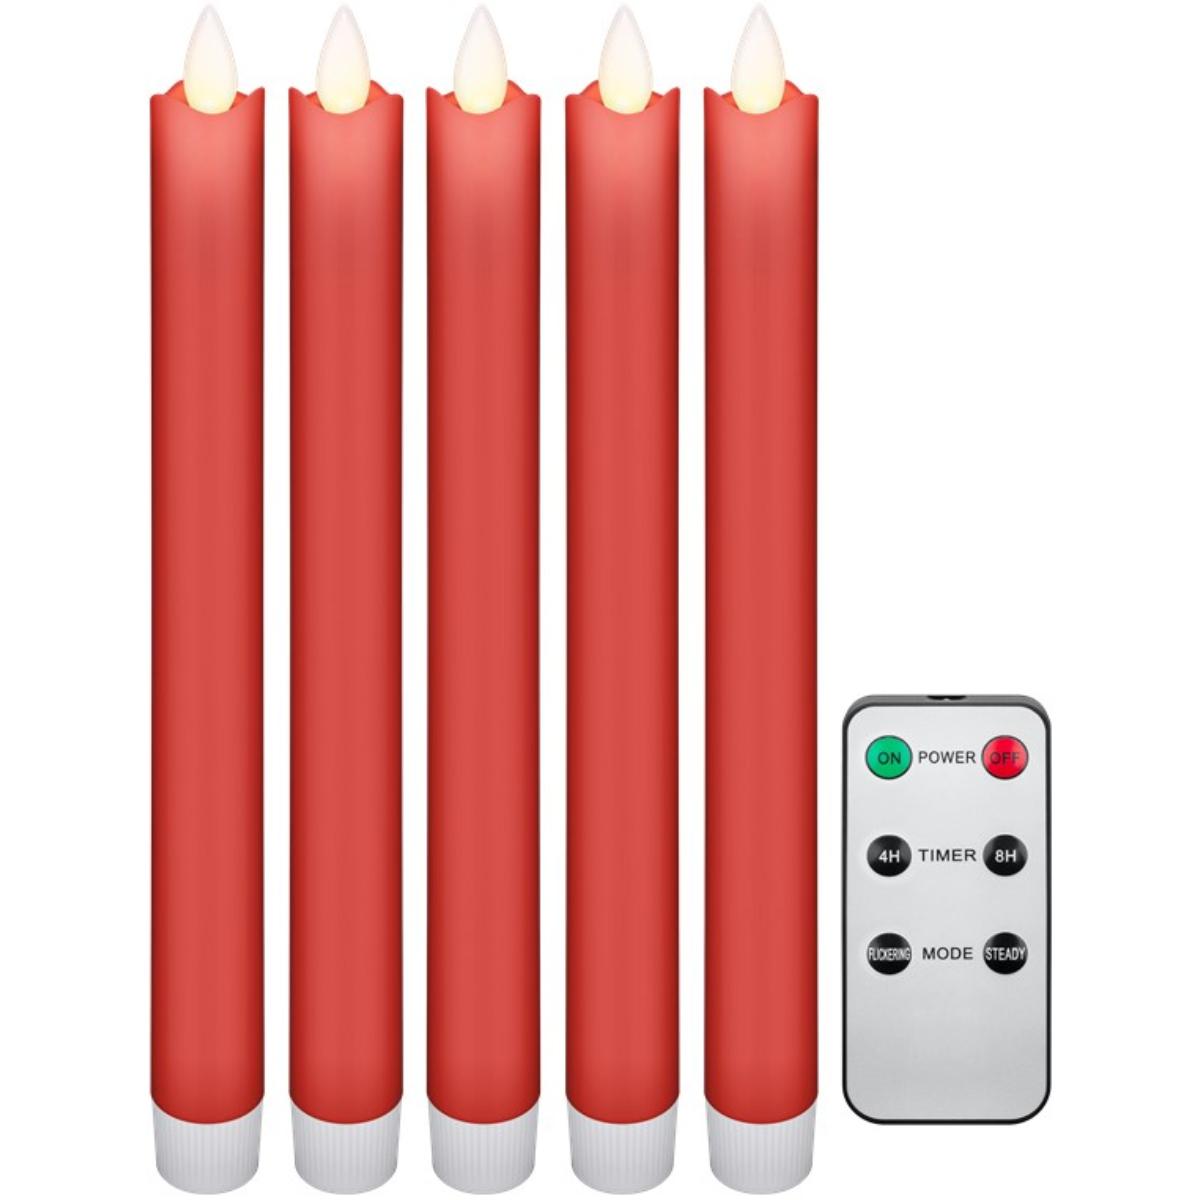 Set of 5 red LED real wax rod candles, incl. remote control Beautiful a - Goobay